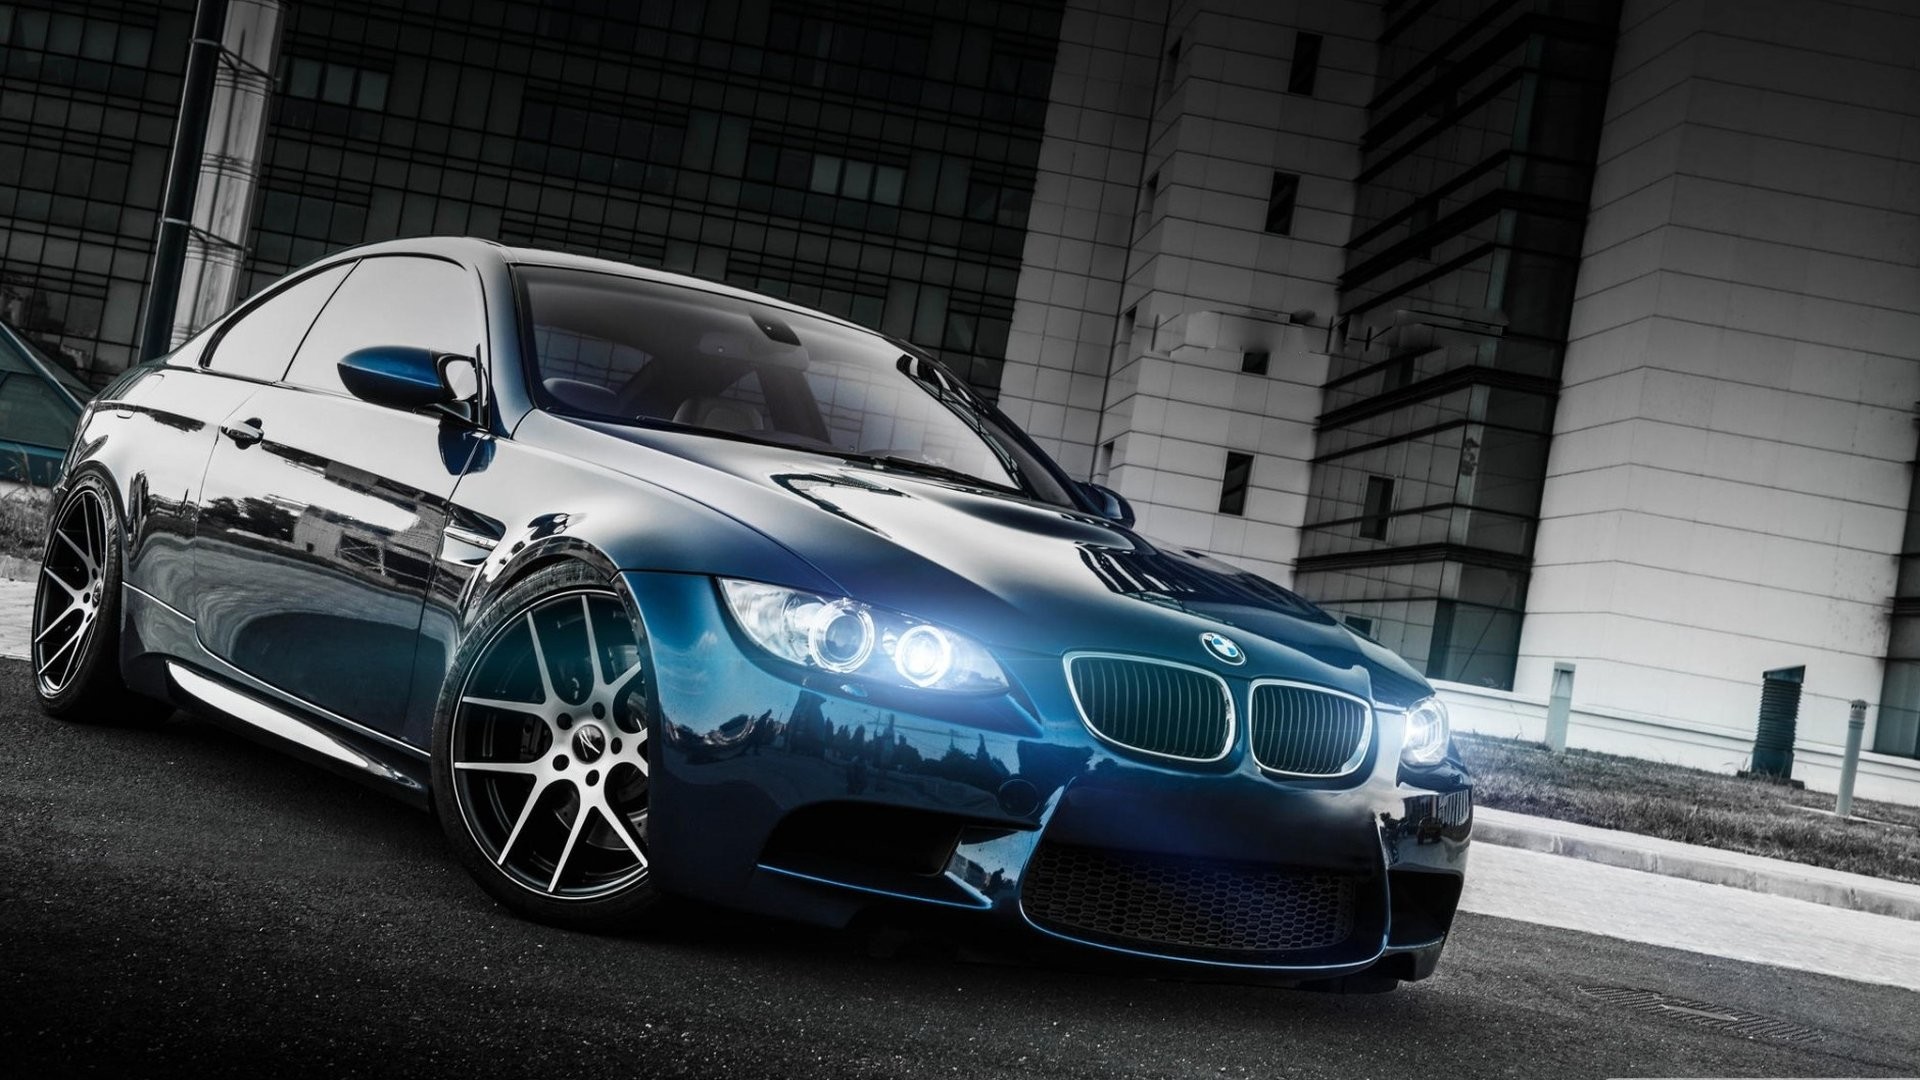 1920x1080 BMW Wallpapers High Quality BMW Backgrounds VDG